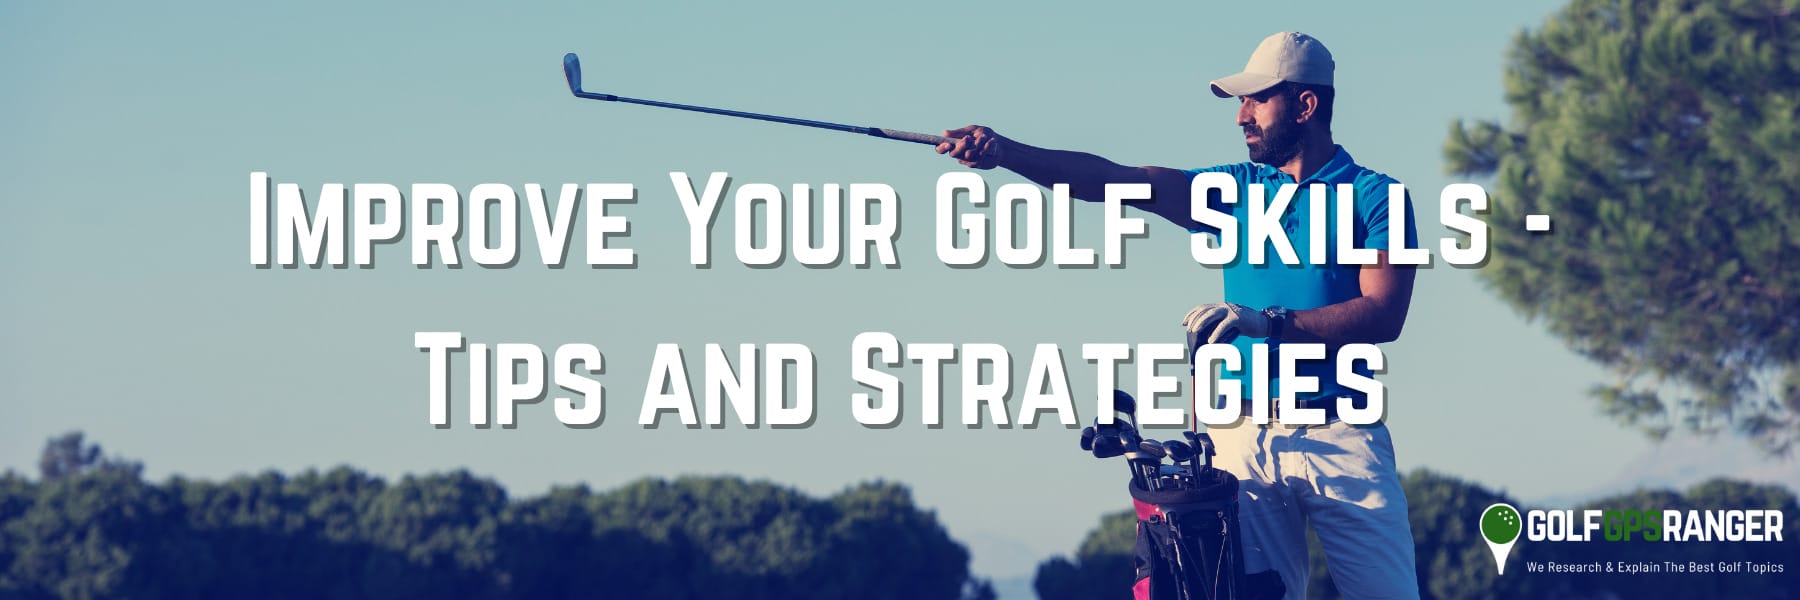 Improve Your Golf Skills - Tips and Strategies